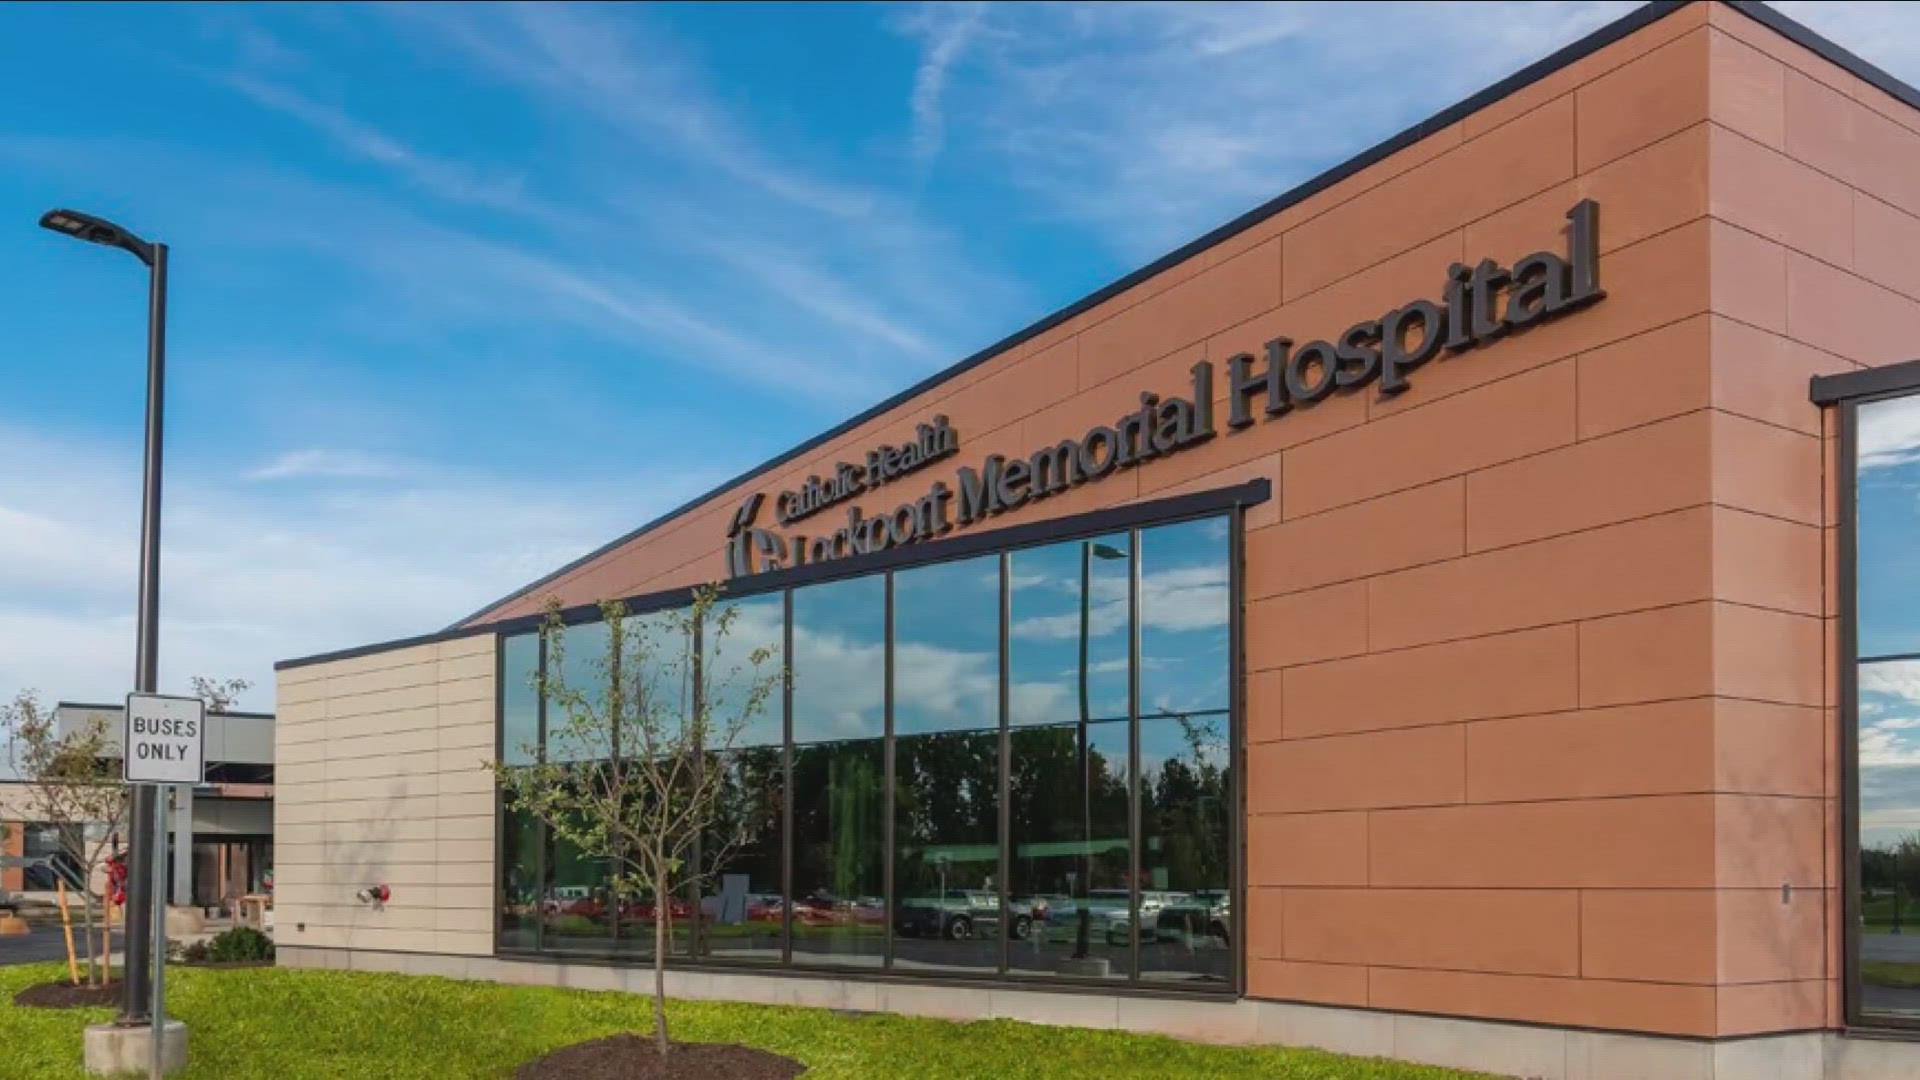 The new facility is expected to serve patients for the first time, three months after the closing of Eastern Niagara Hospital.